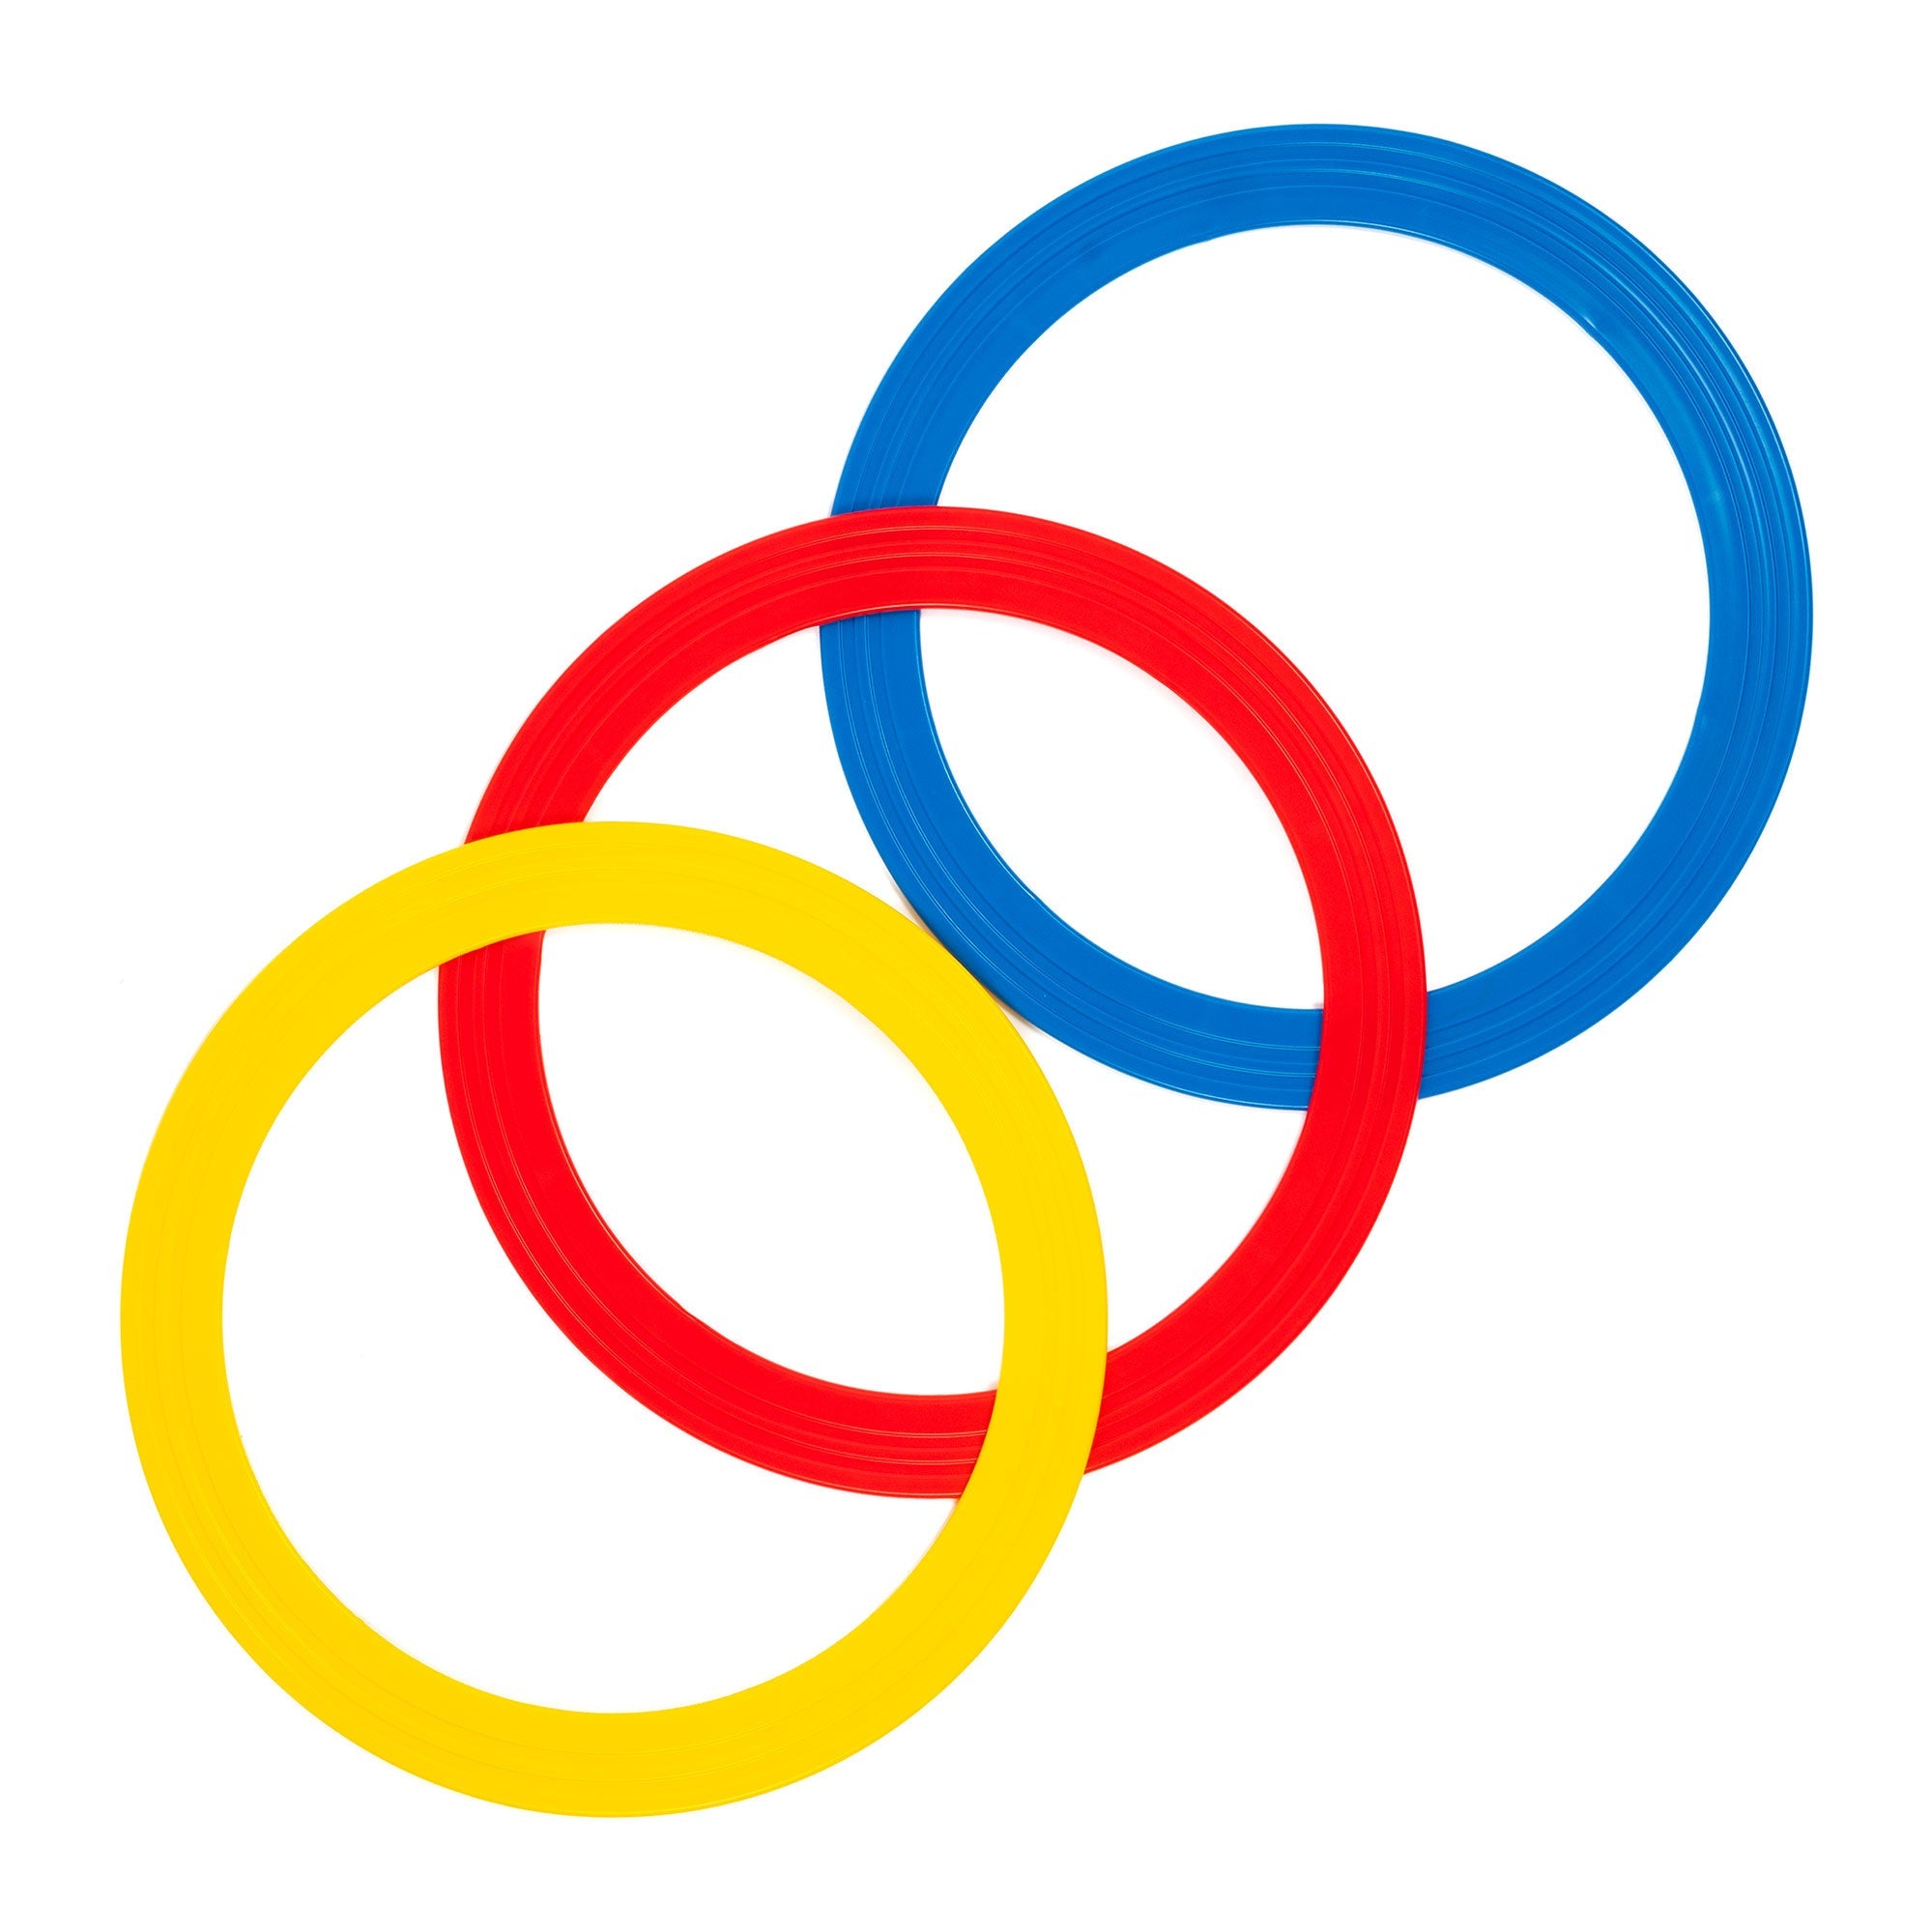 Arrangement of three rings in blue, red and yellow